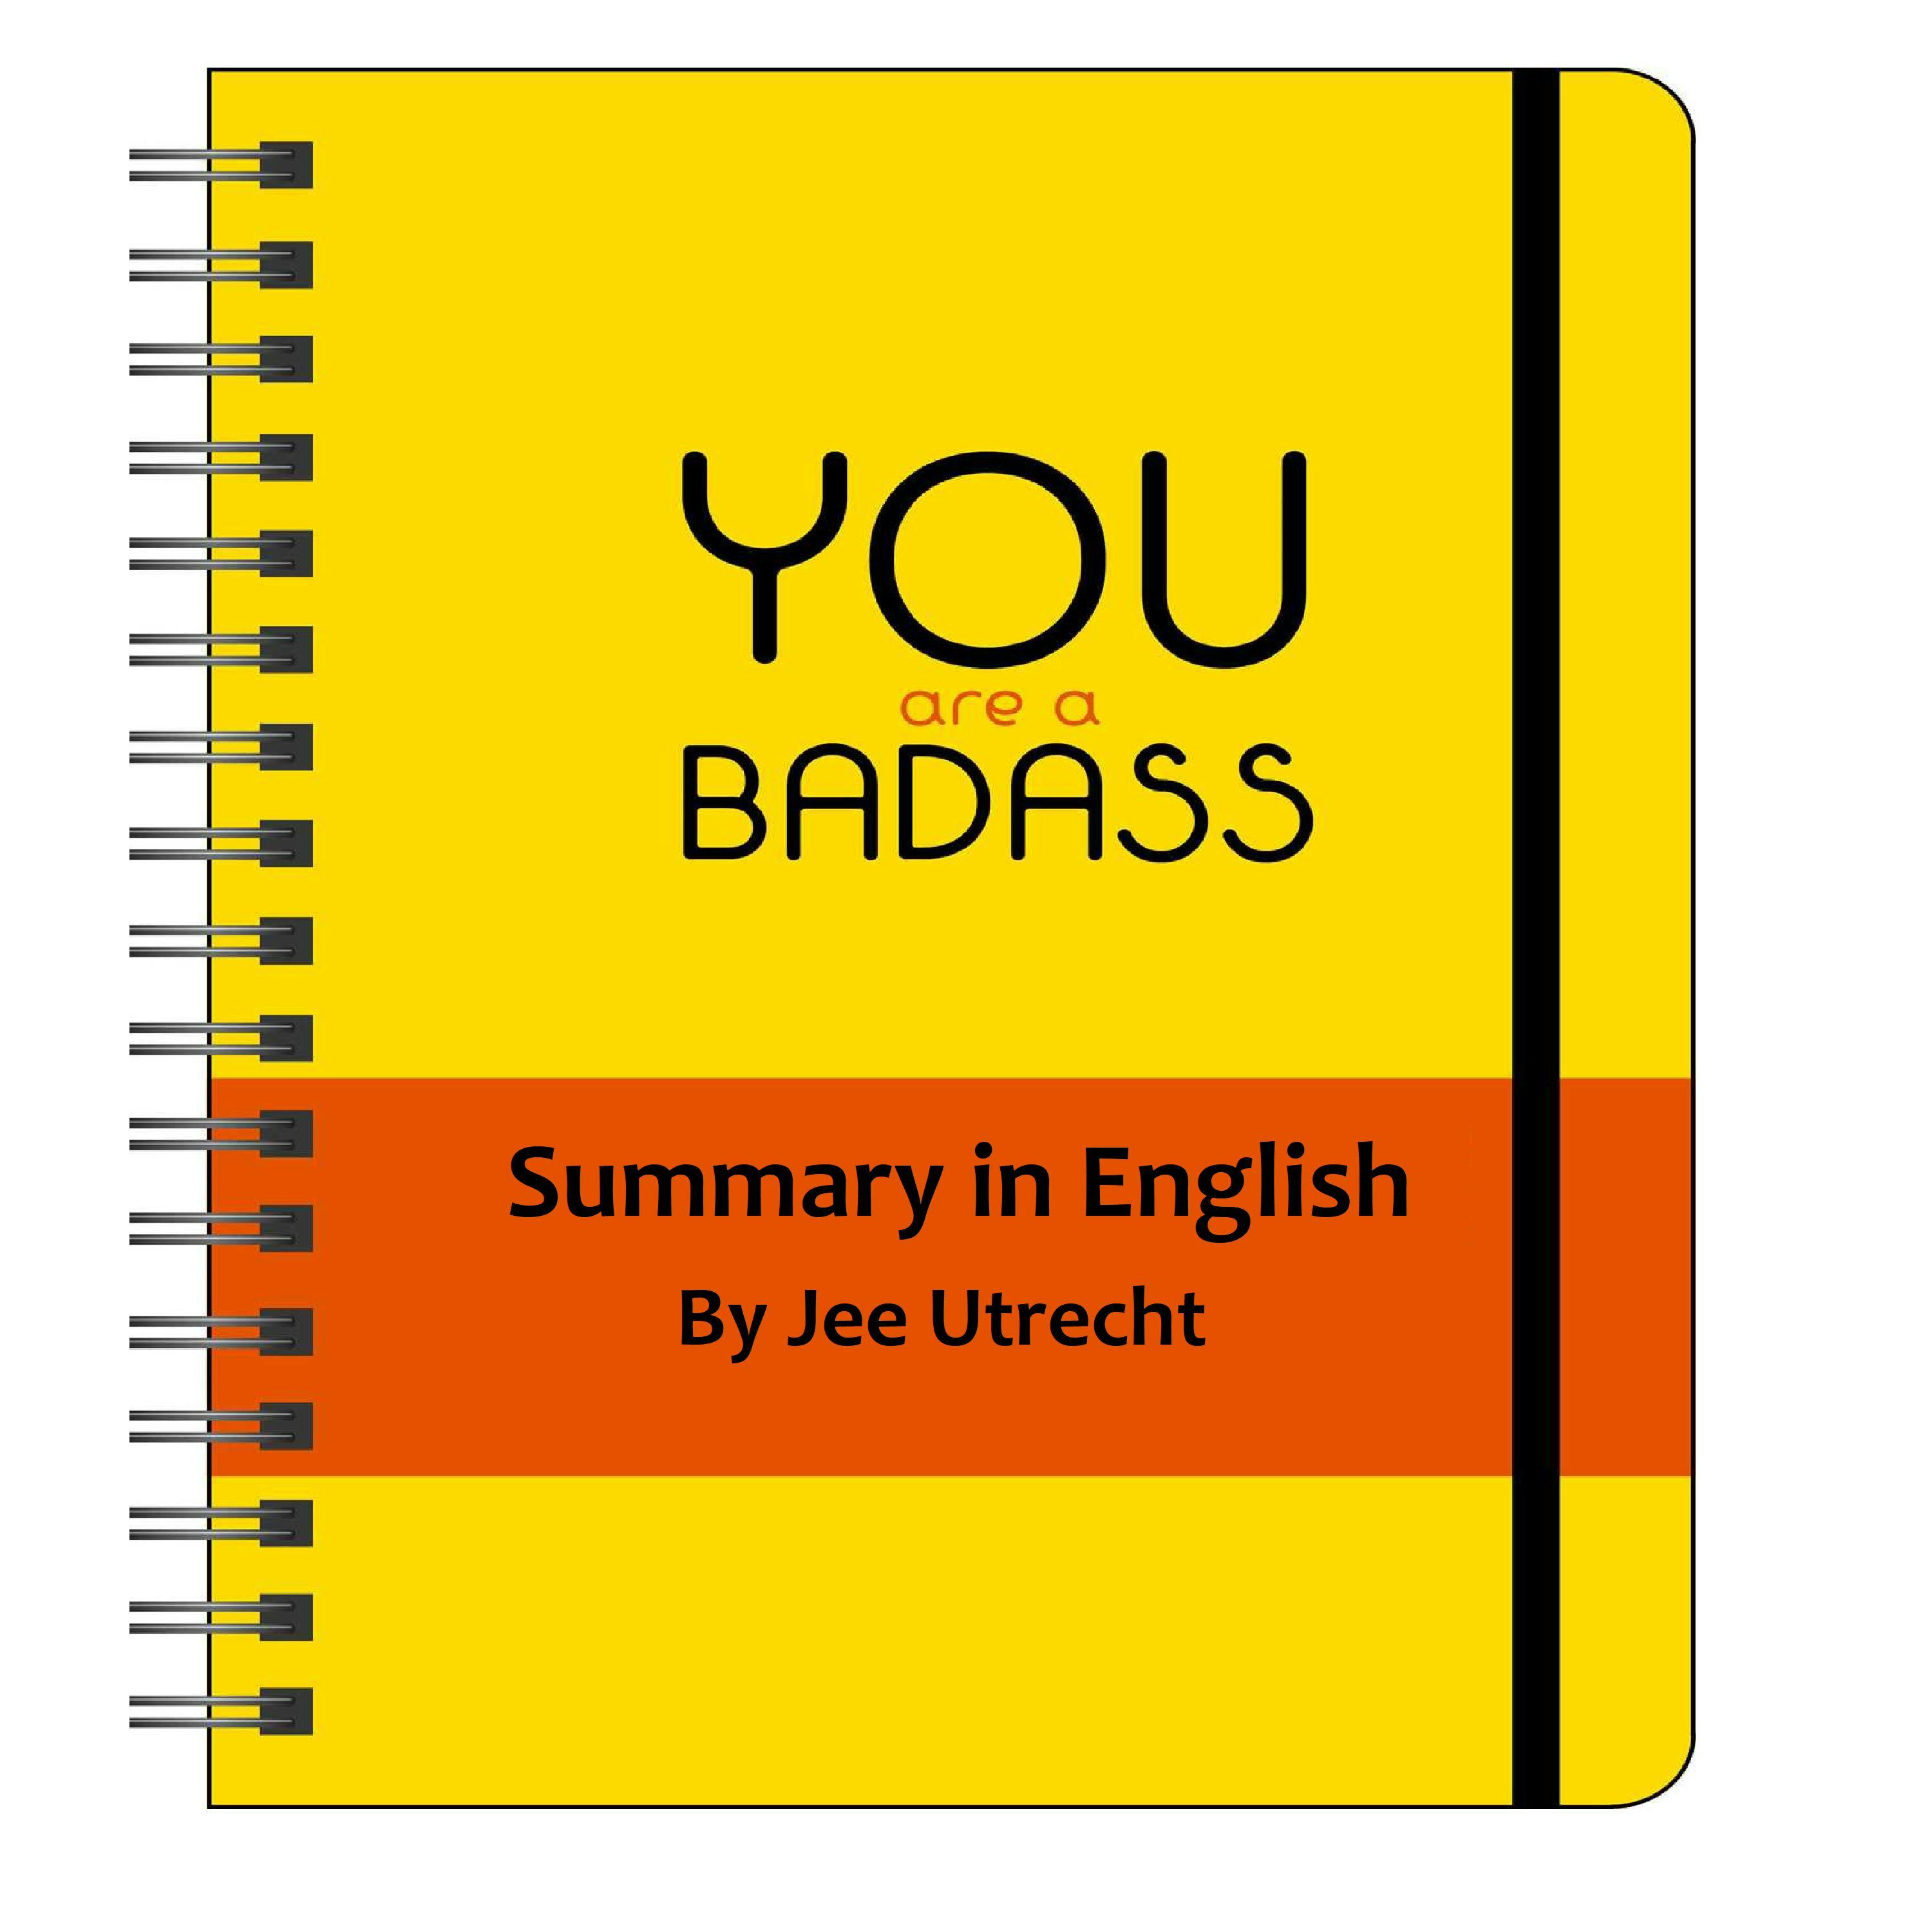 You are a badass - Summary in English: Separated into chapters summaries - Jee Utrecht, Jee